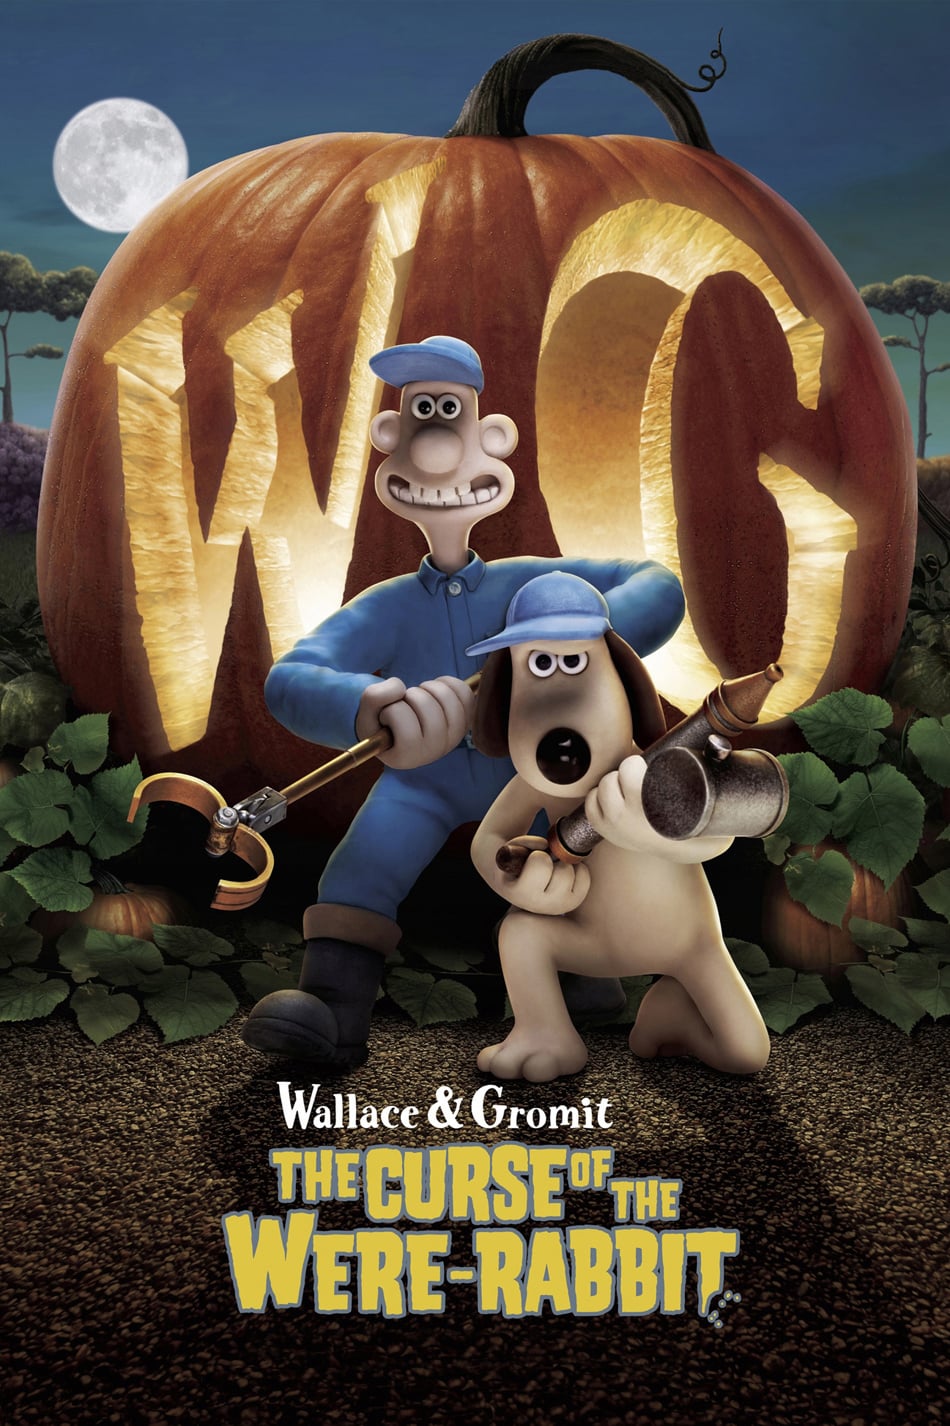 WALLACE AND GROMIT IN THE CURSE OF THE WERE-RABBIT